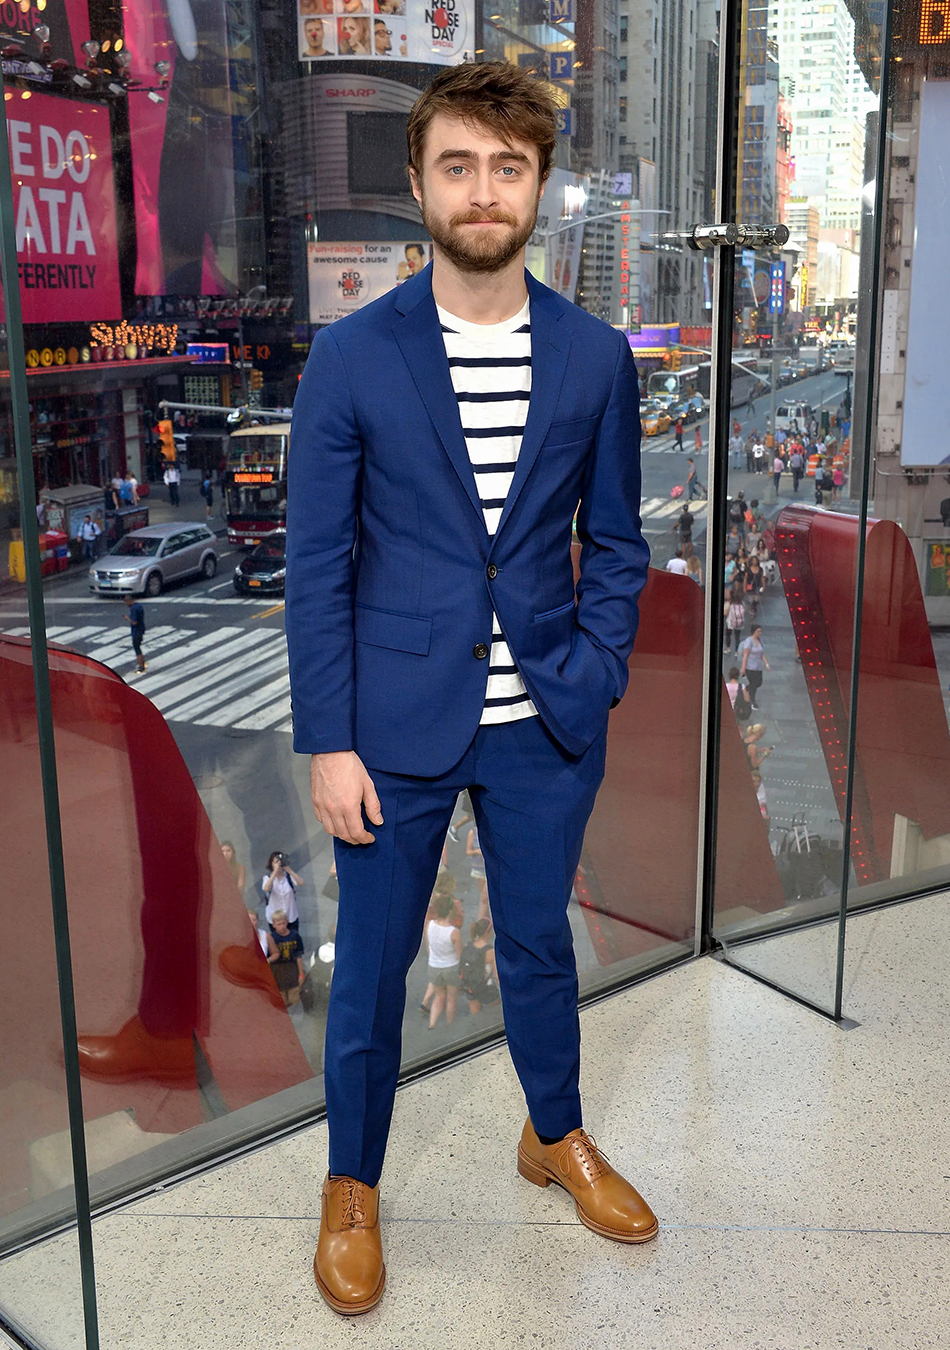 Blue suit, white/navy striped t-shirt, and tan oxford shoes